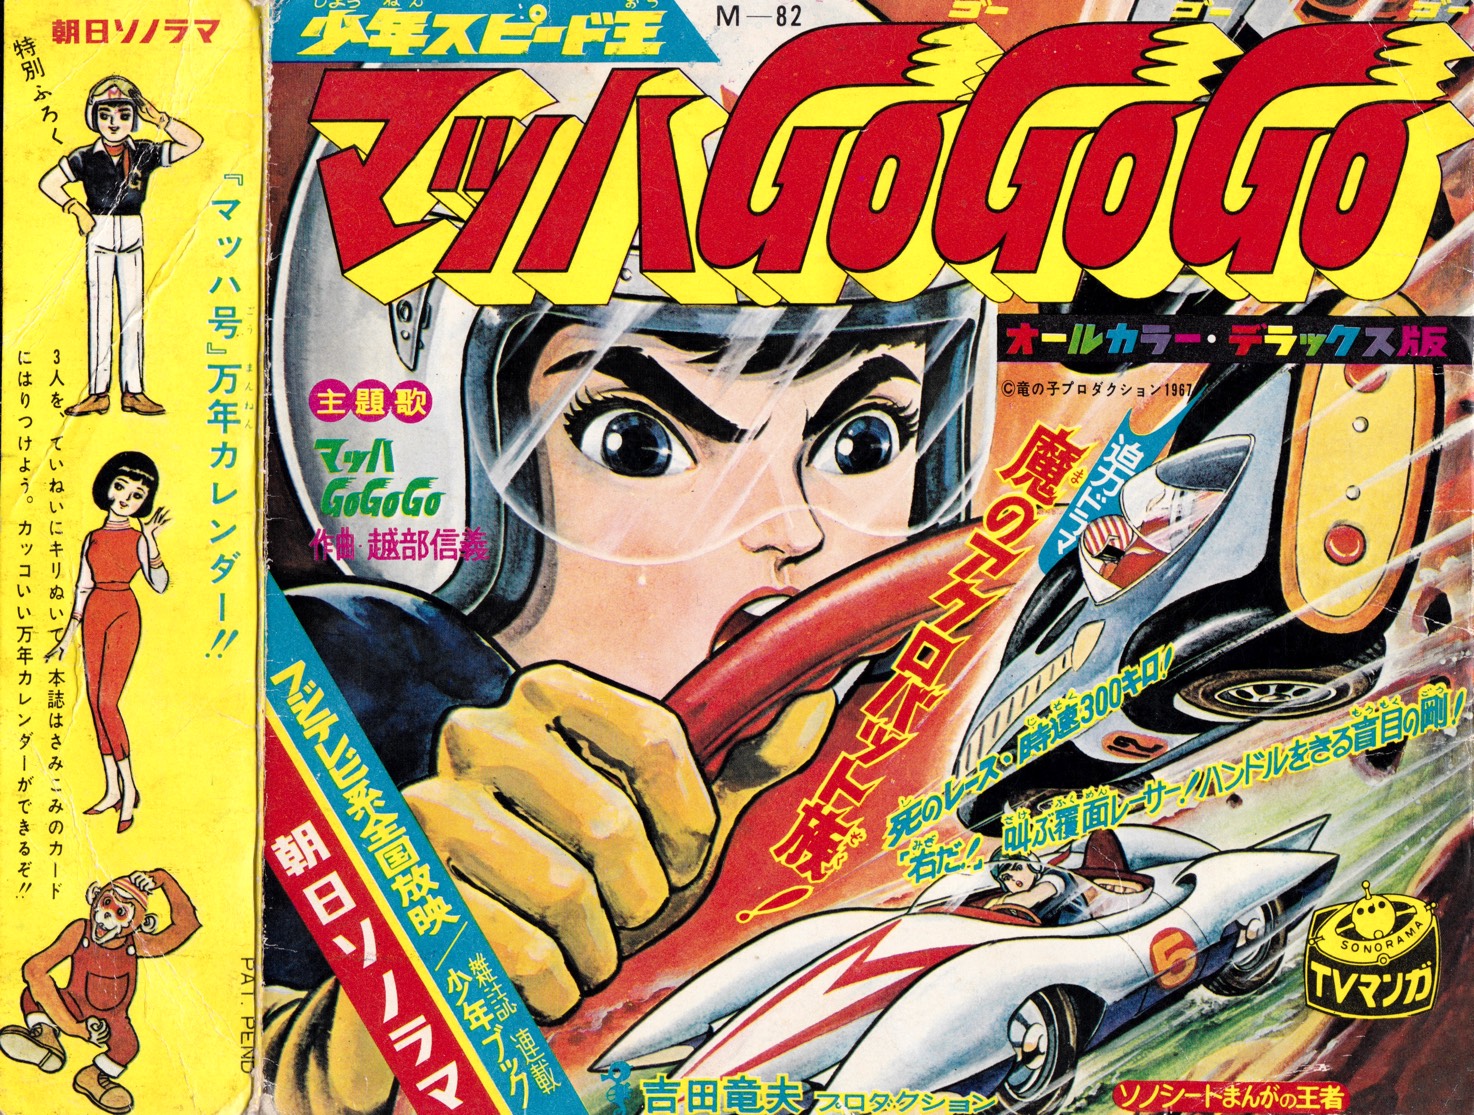 and everything else too: Speed Racer, aka Mach GoGoGo (33 1/3rd)